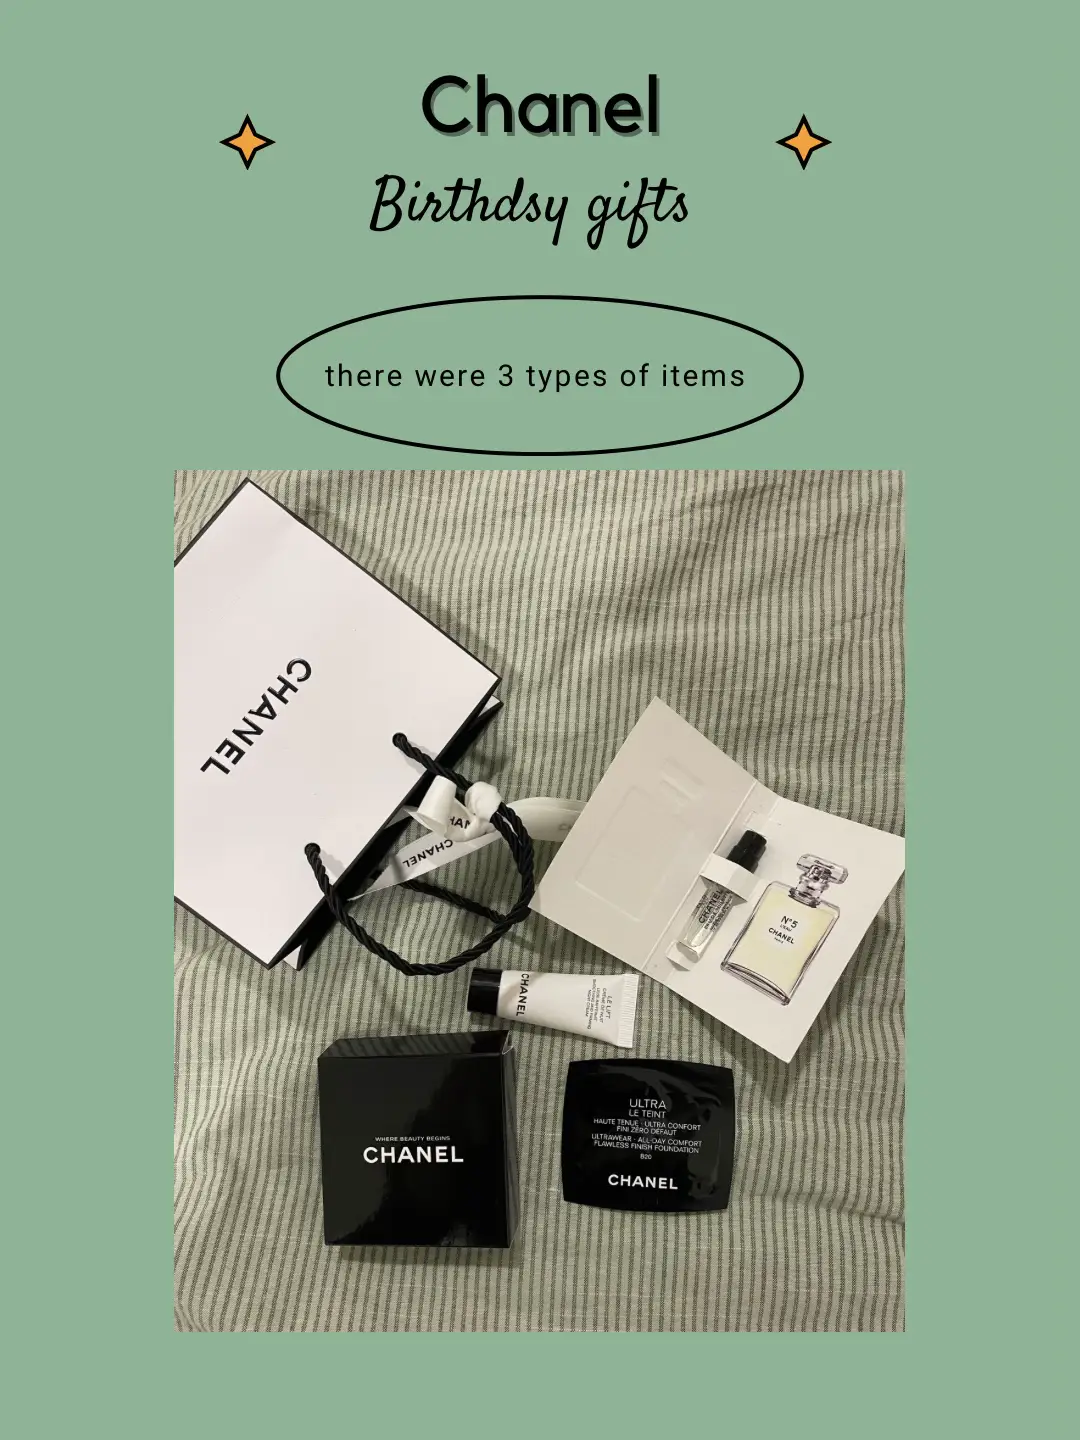 Birthday gifts from Chanel, Gallery posted by srhazm